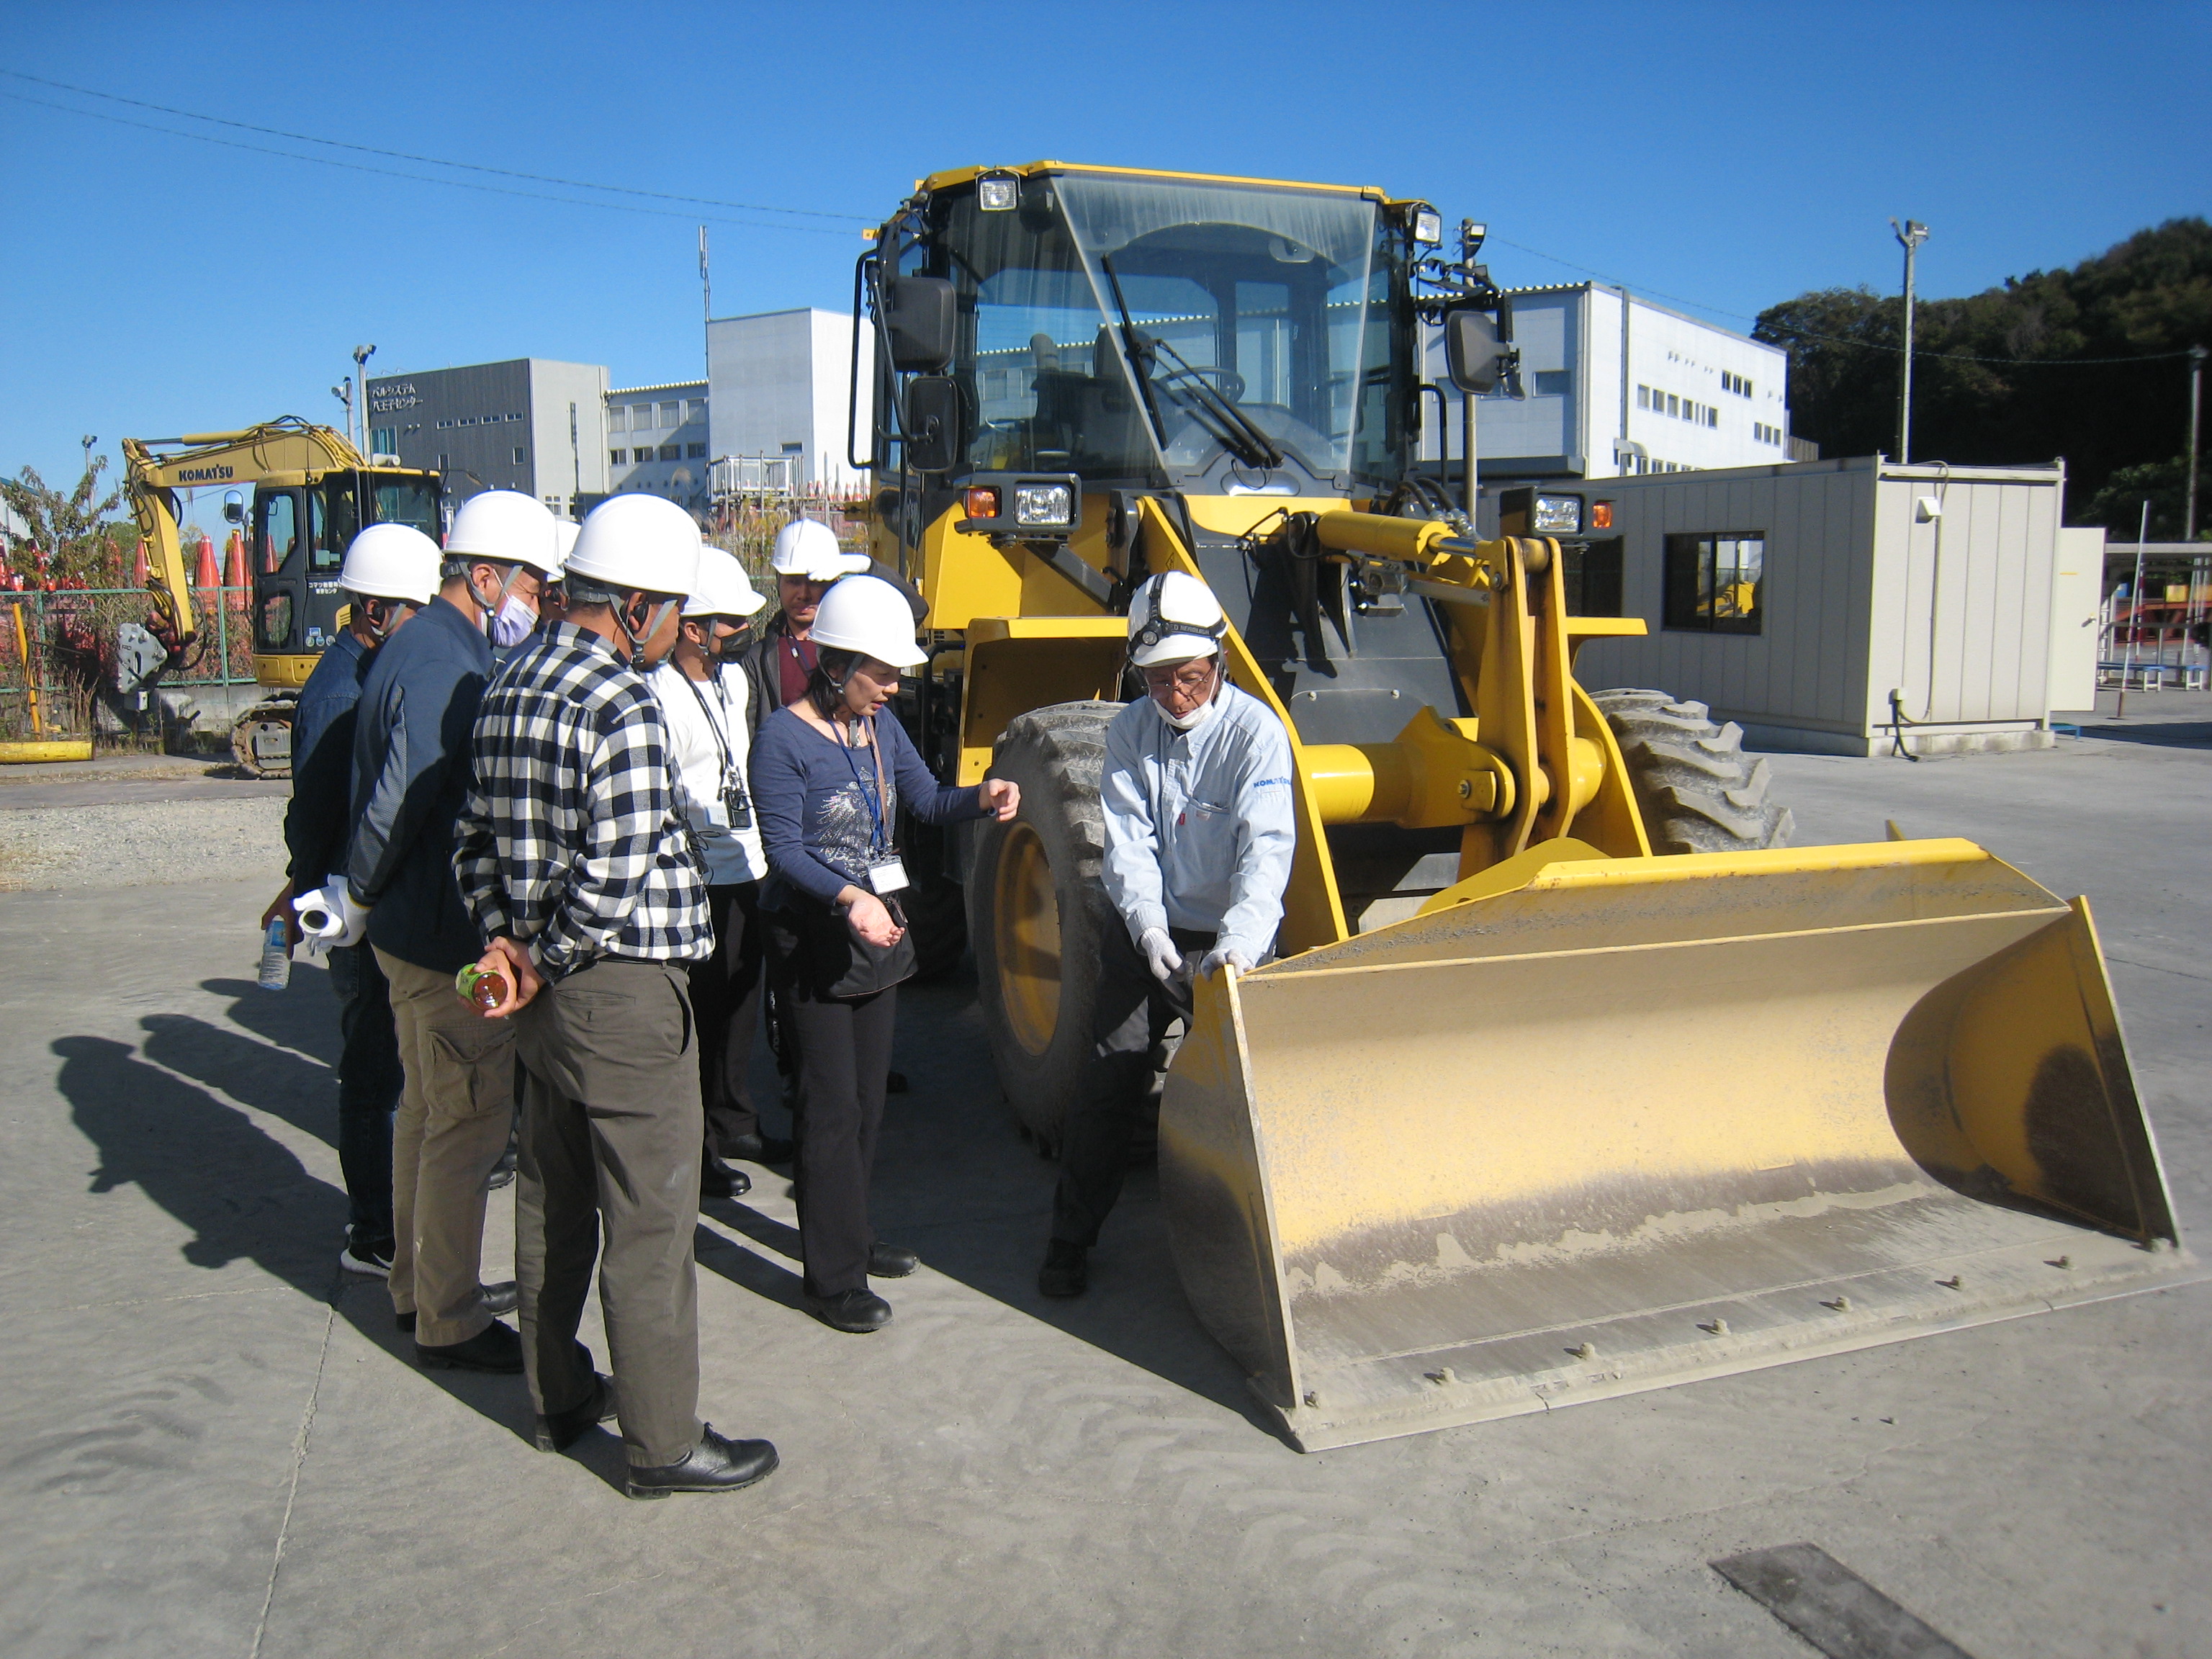 Learn operational safety of construction equipment (at Komatsu Safety Training Center)